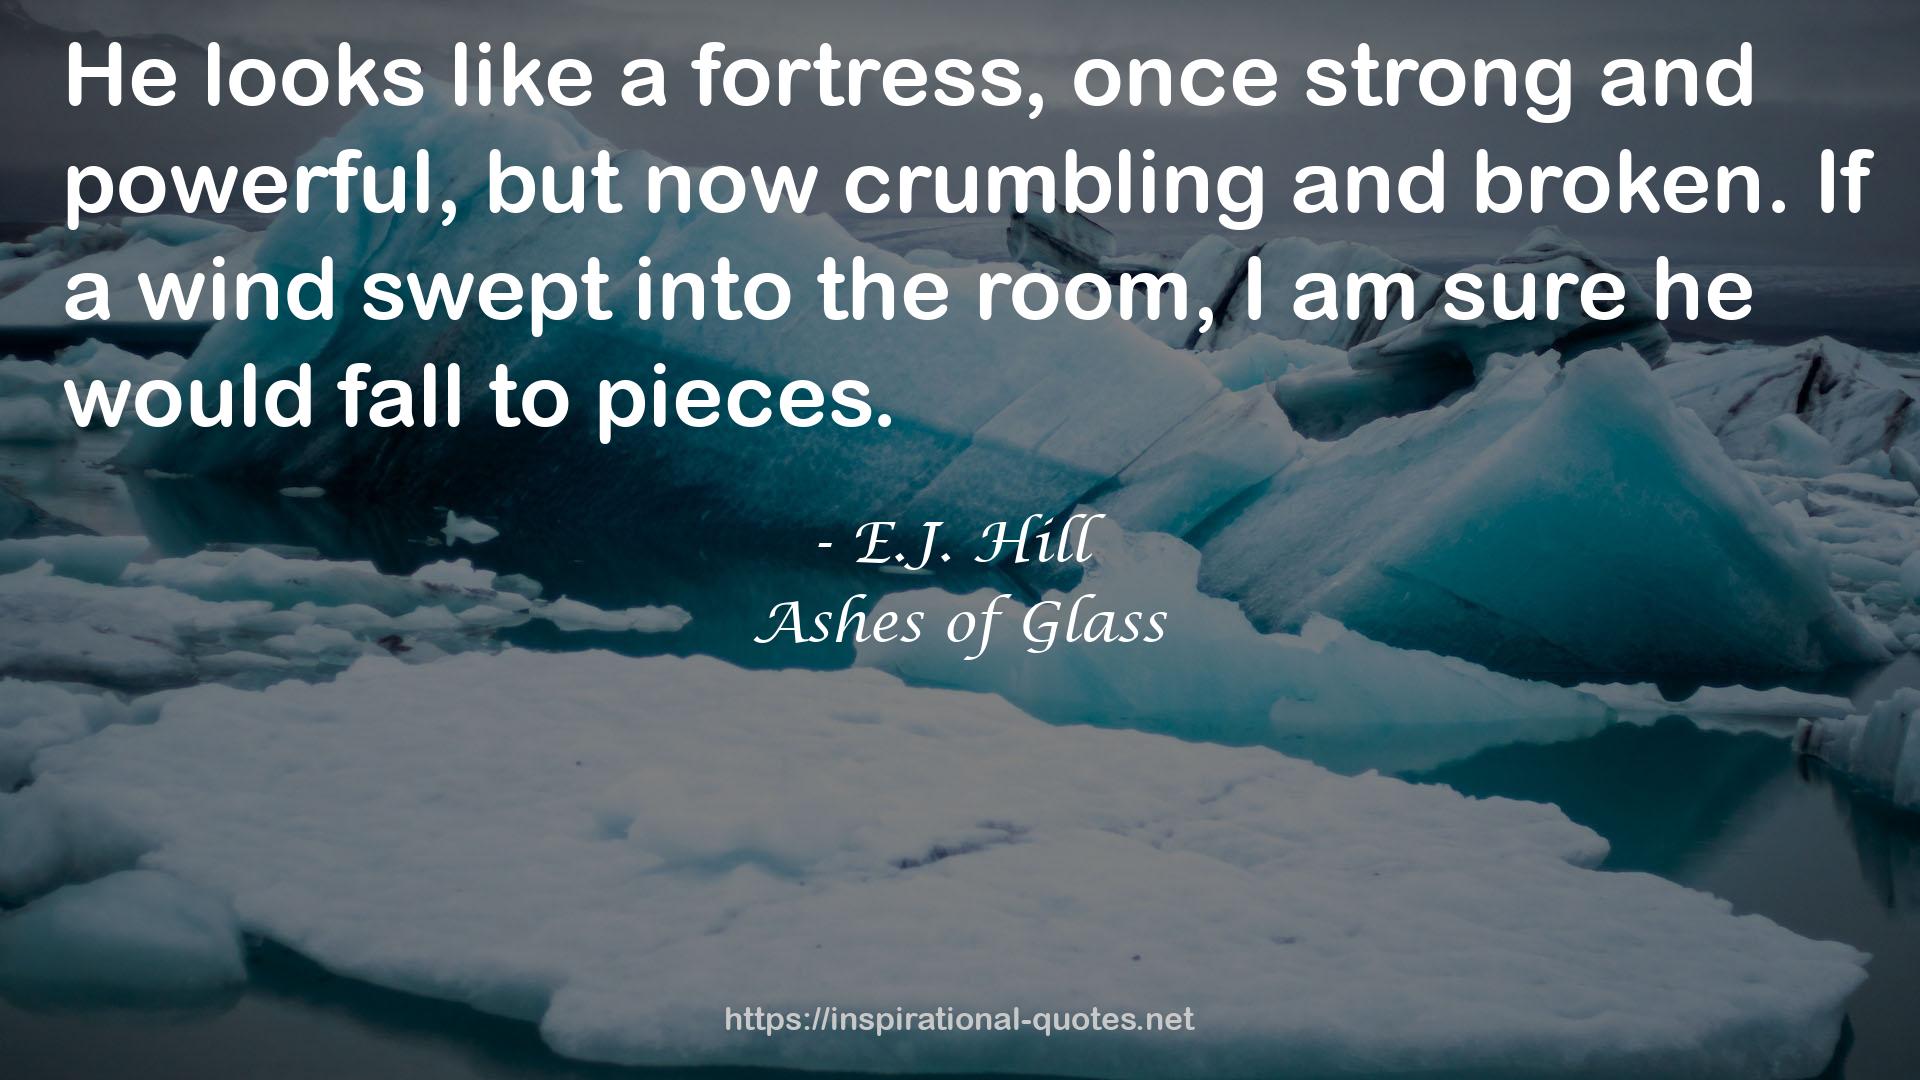 Ashes of Glass QUOTES